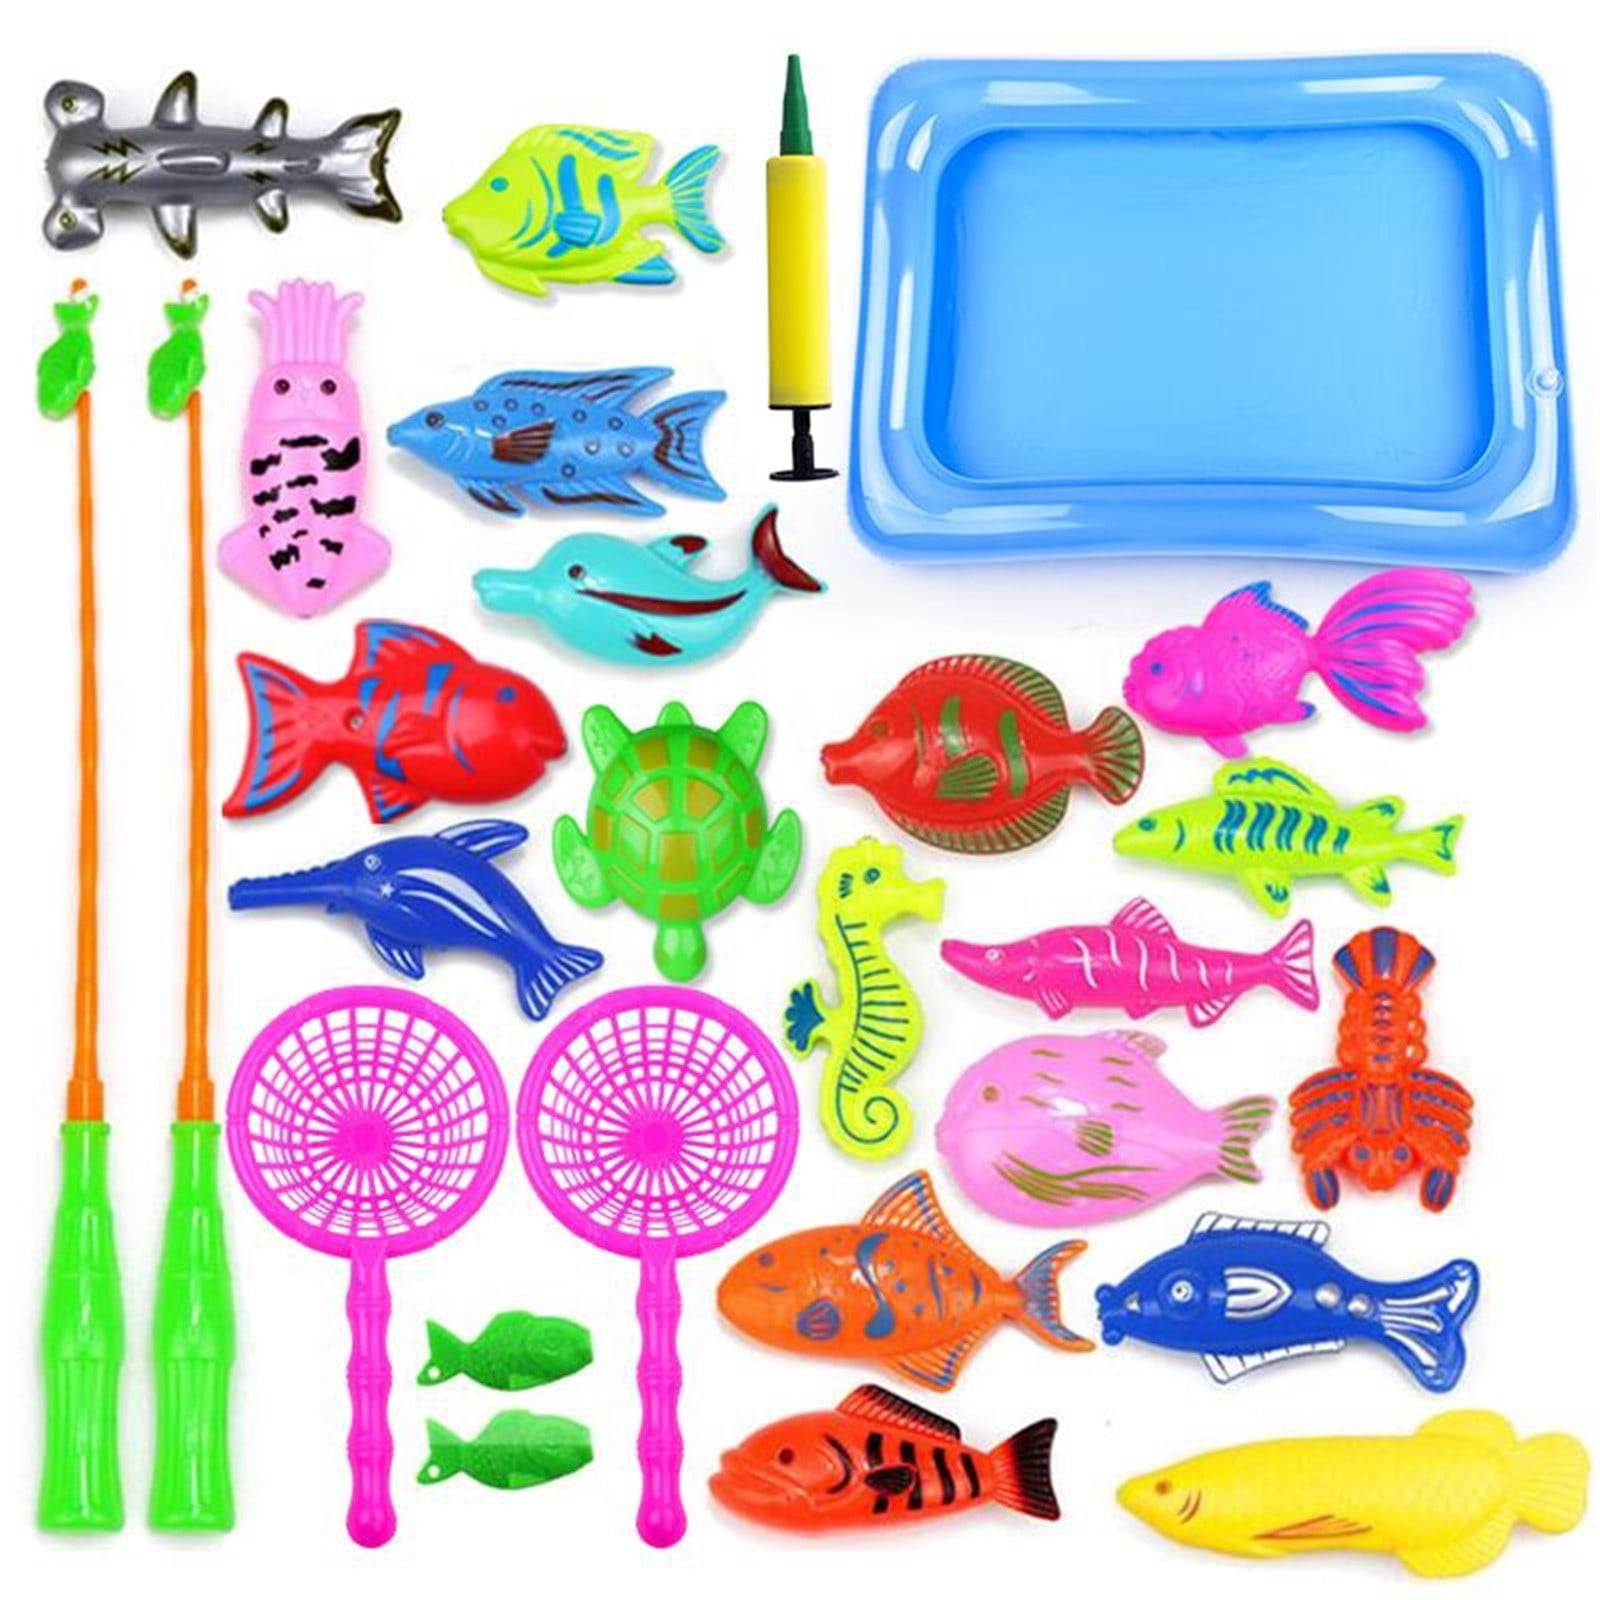 Baby Bath Toy Set Magnetic Fishing Game Pool Toys for Kids - Bath